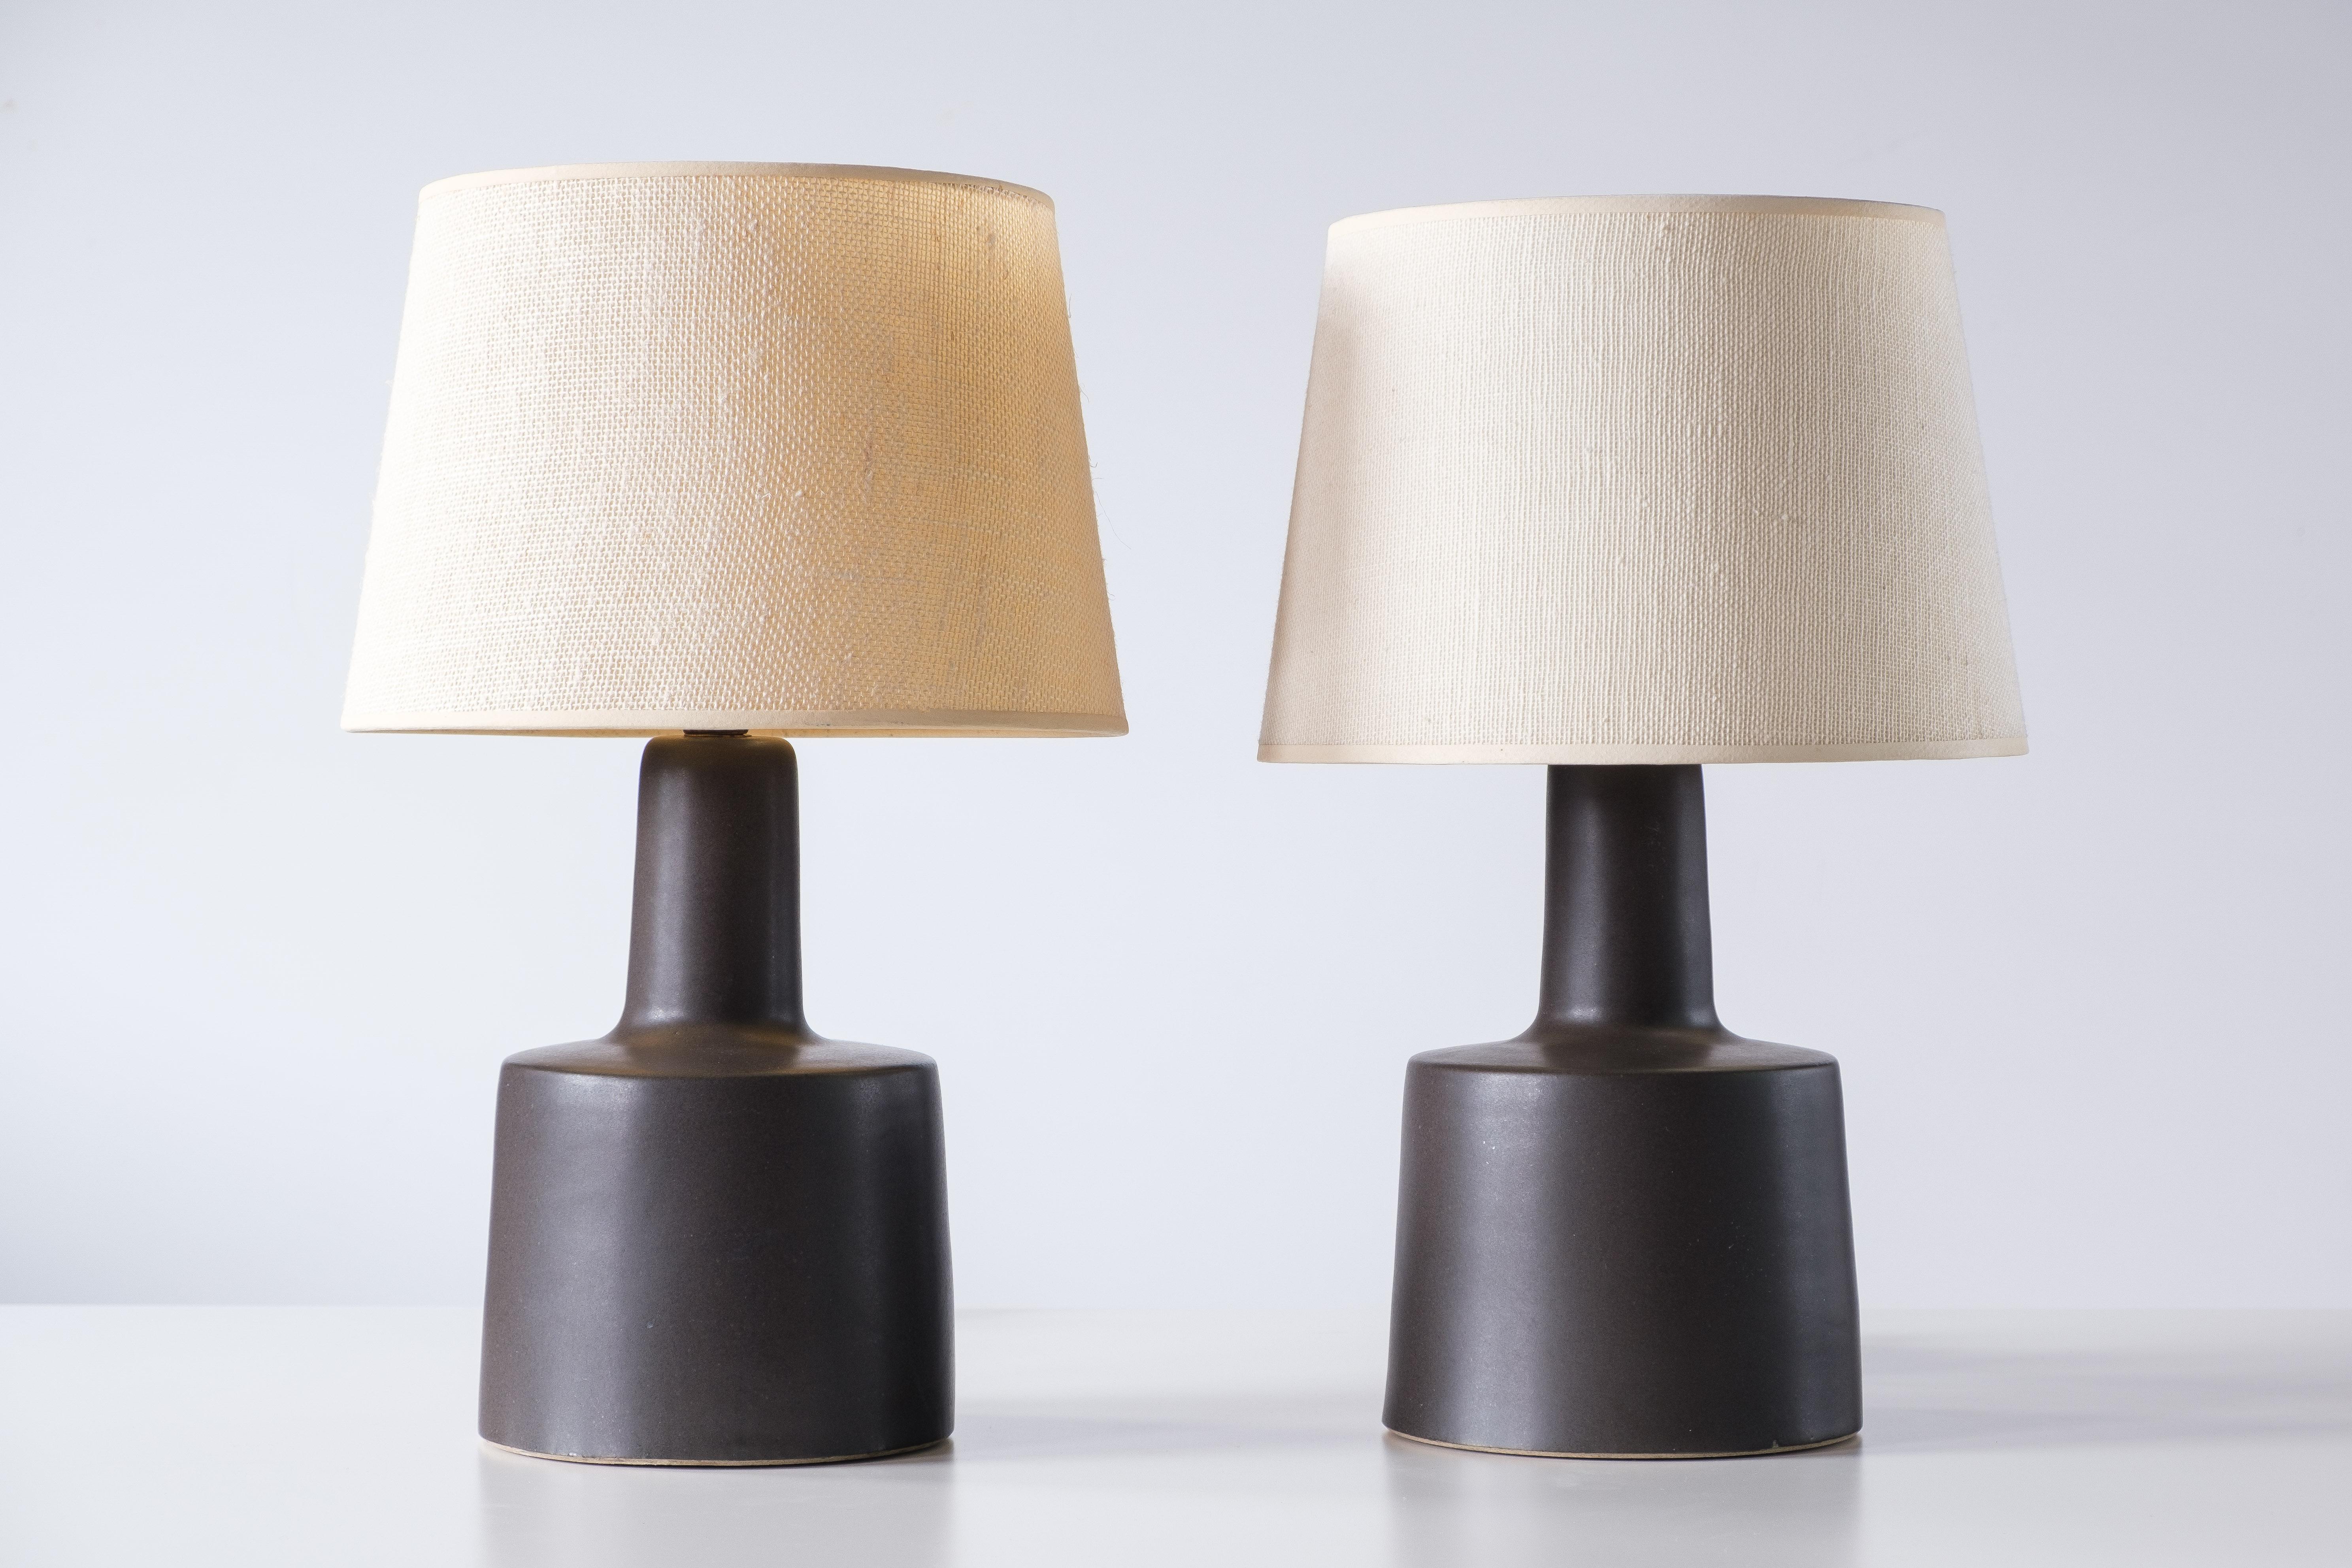 💡 WHAT IS IT?
—
Another gem from the masters of mid century lightning – Gordon and Jane Martz.

These signed Martz model 105 lamps comes in a matte black glaze.

This is a beautiful but smaller piece that fits great on a dresser, nightstand, end